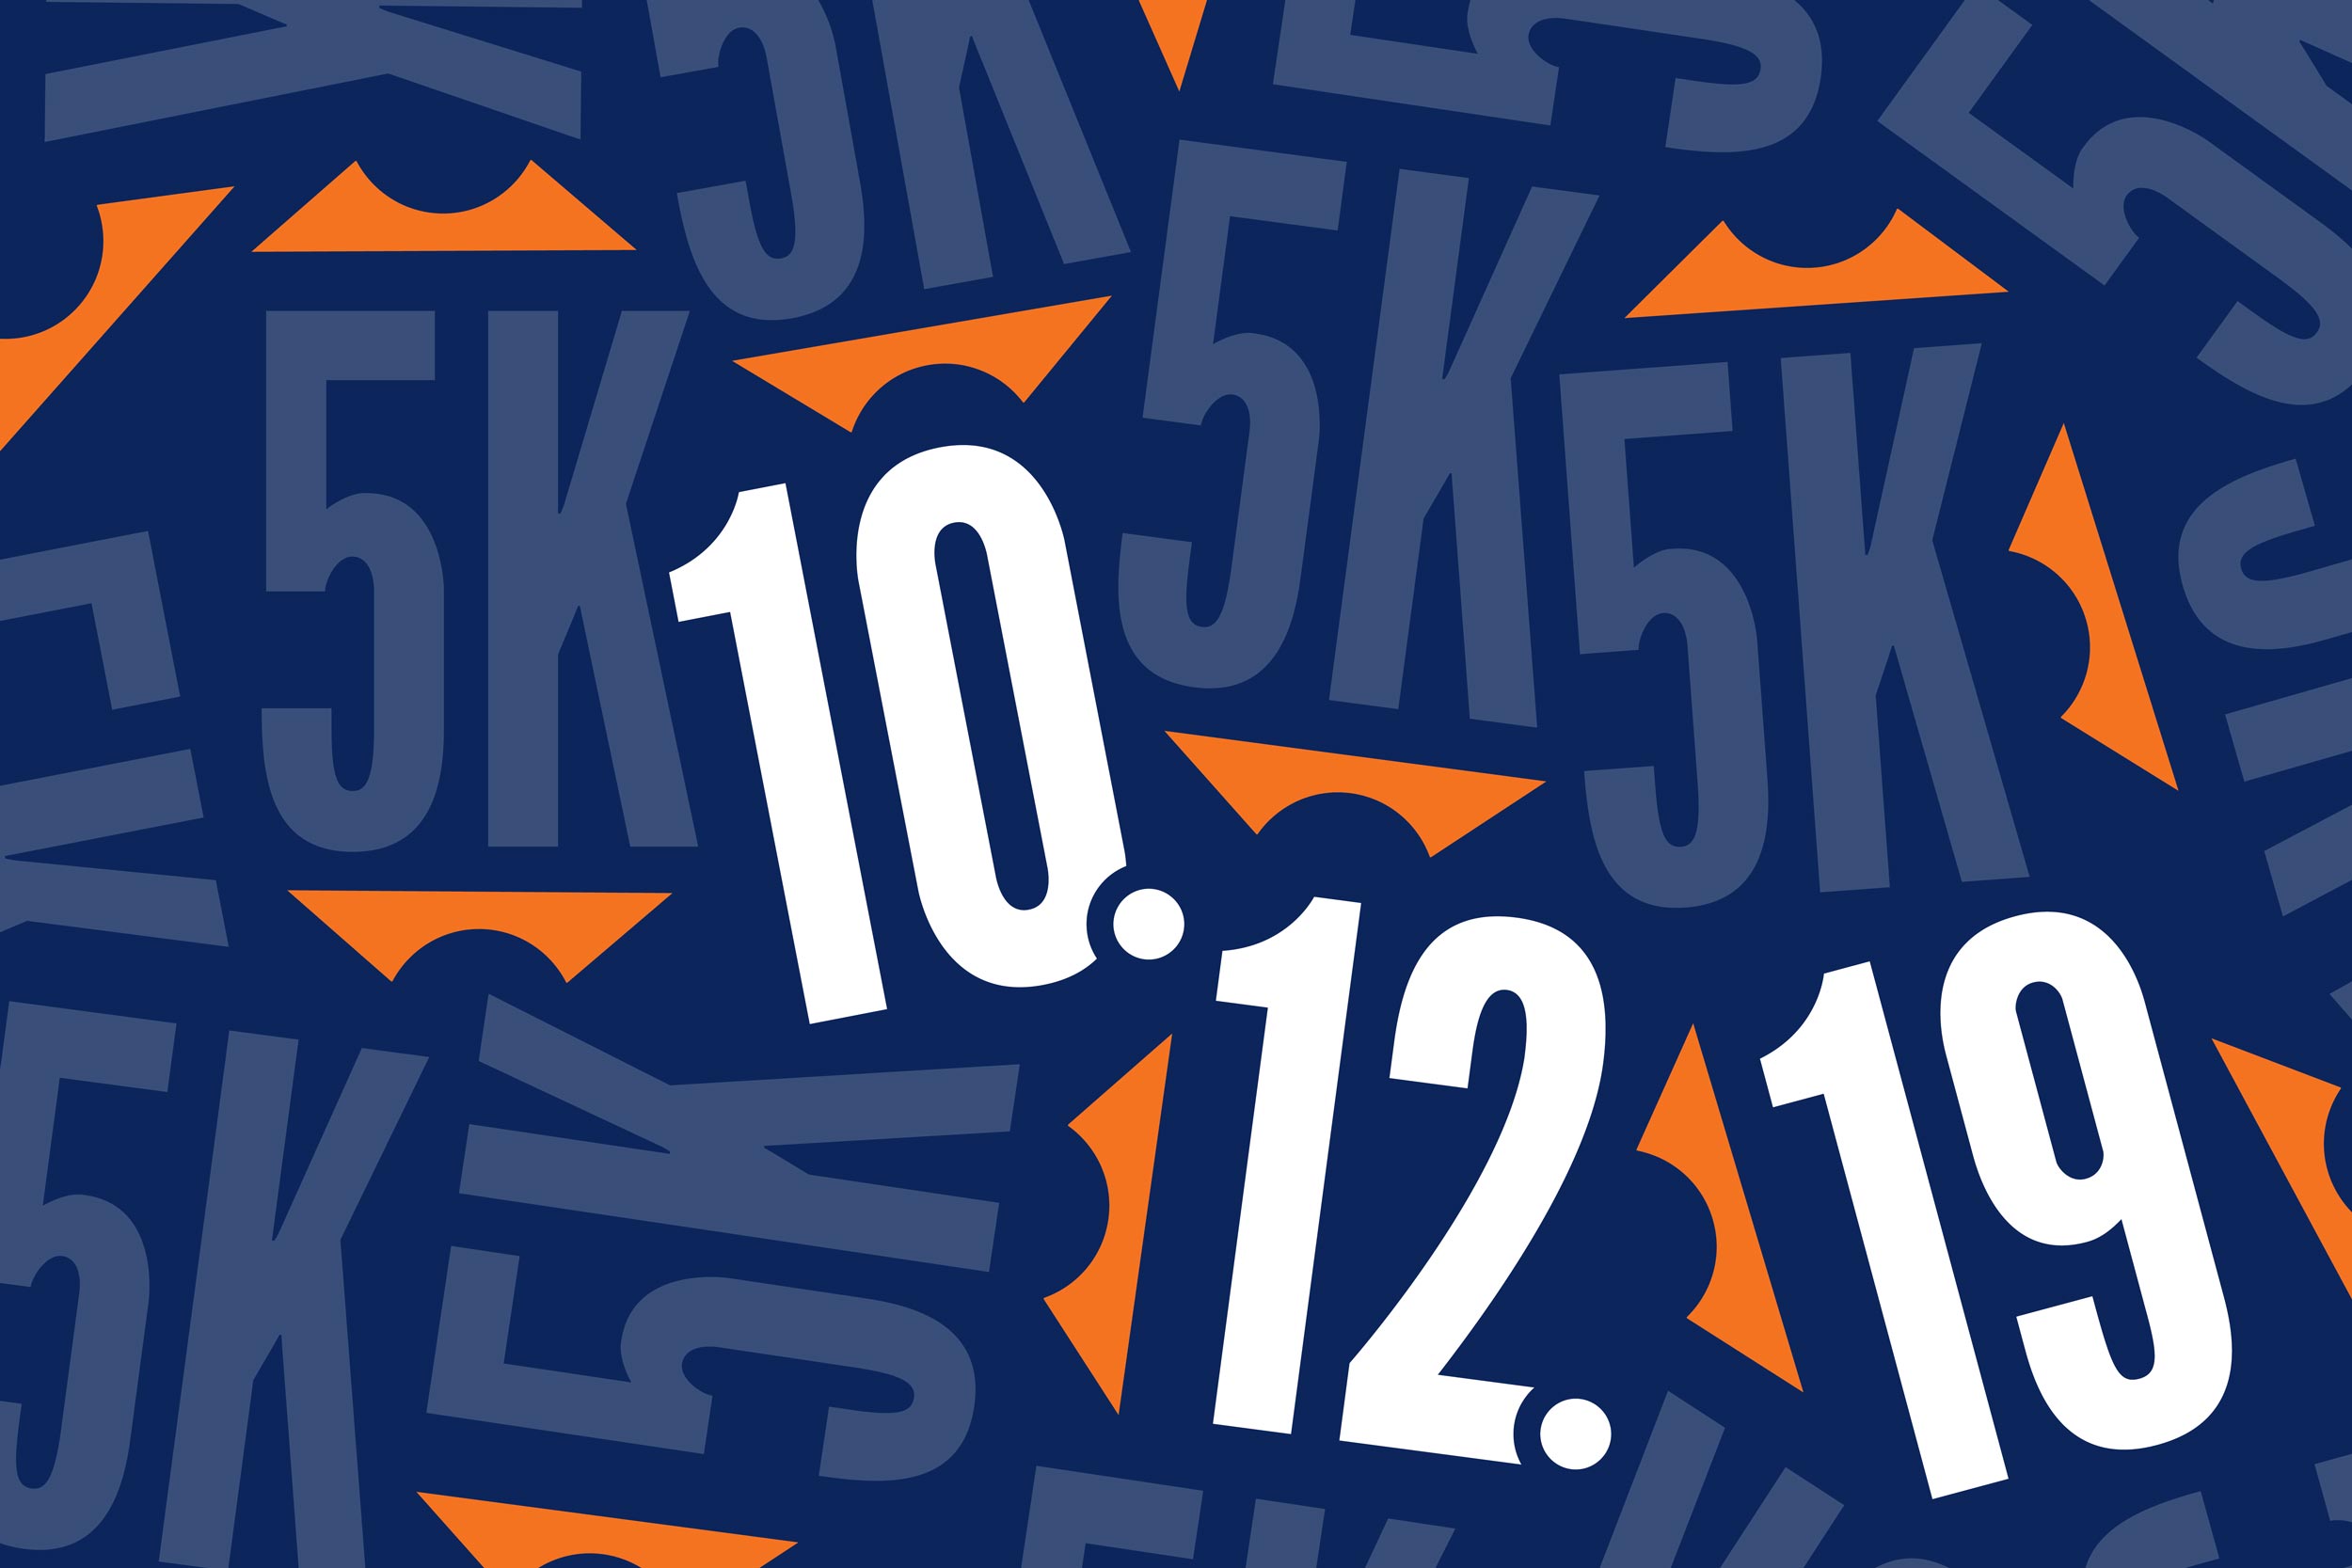 text 5K repeated and a 10.12.19